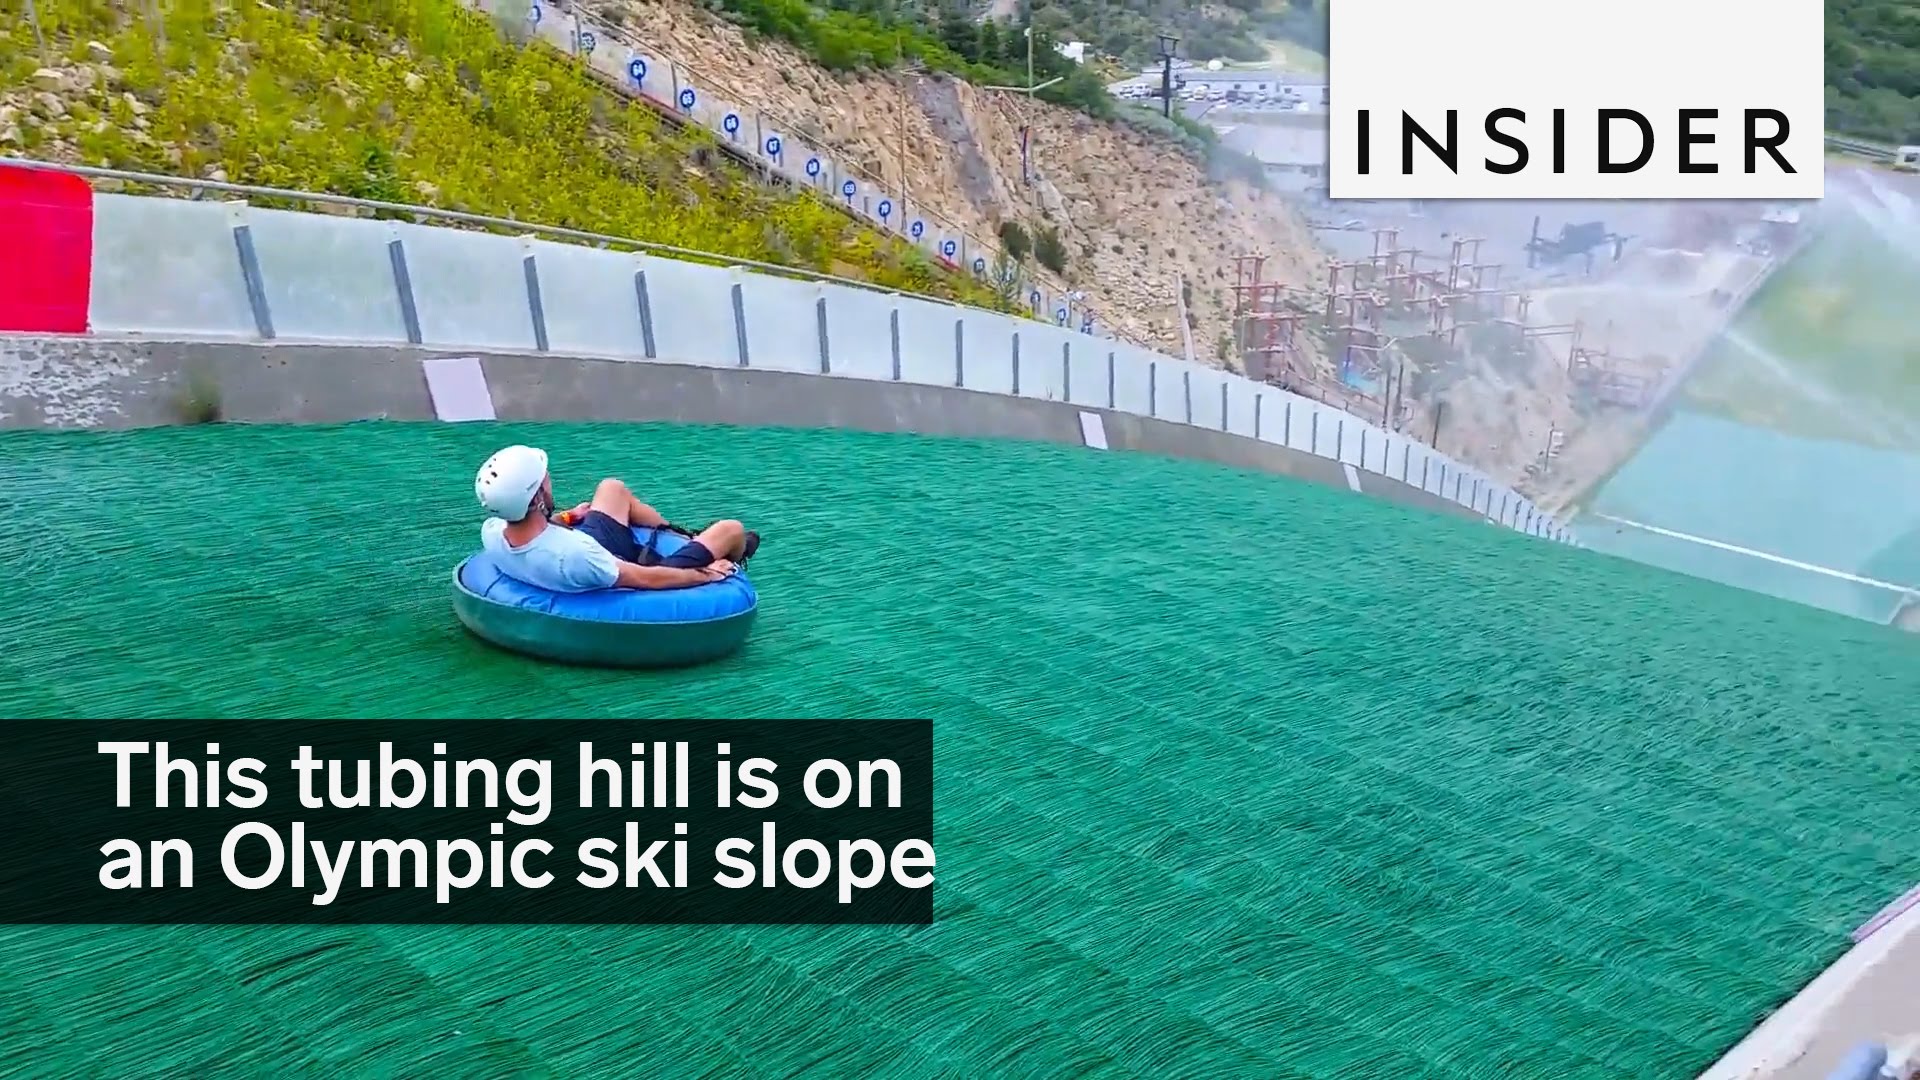 This tubing hill is on an Olympic ski jump slope